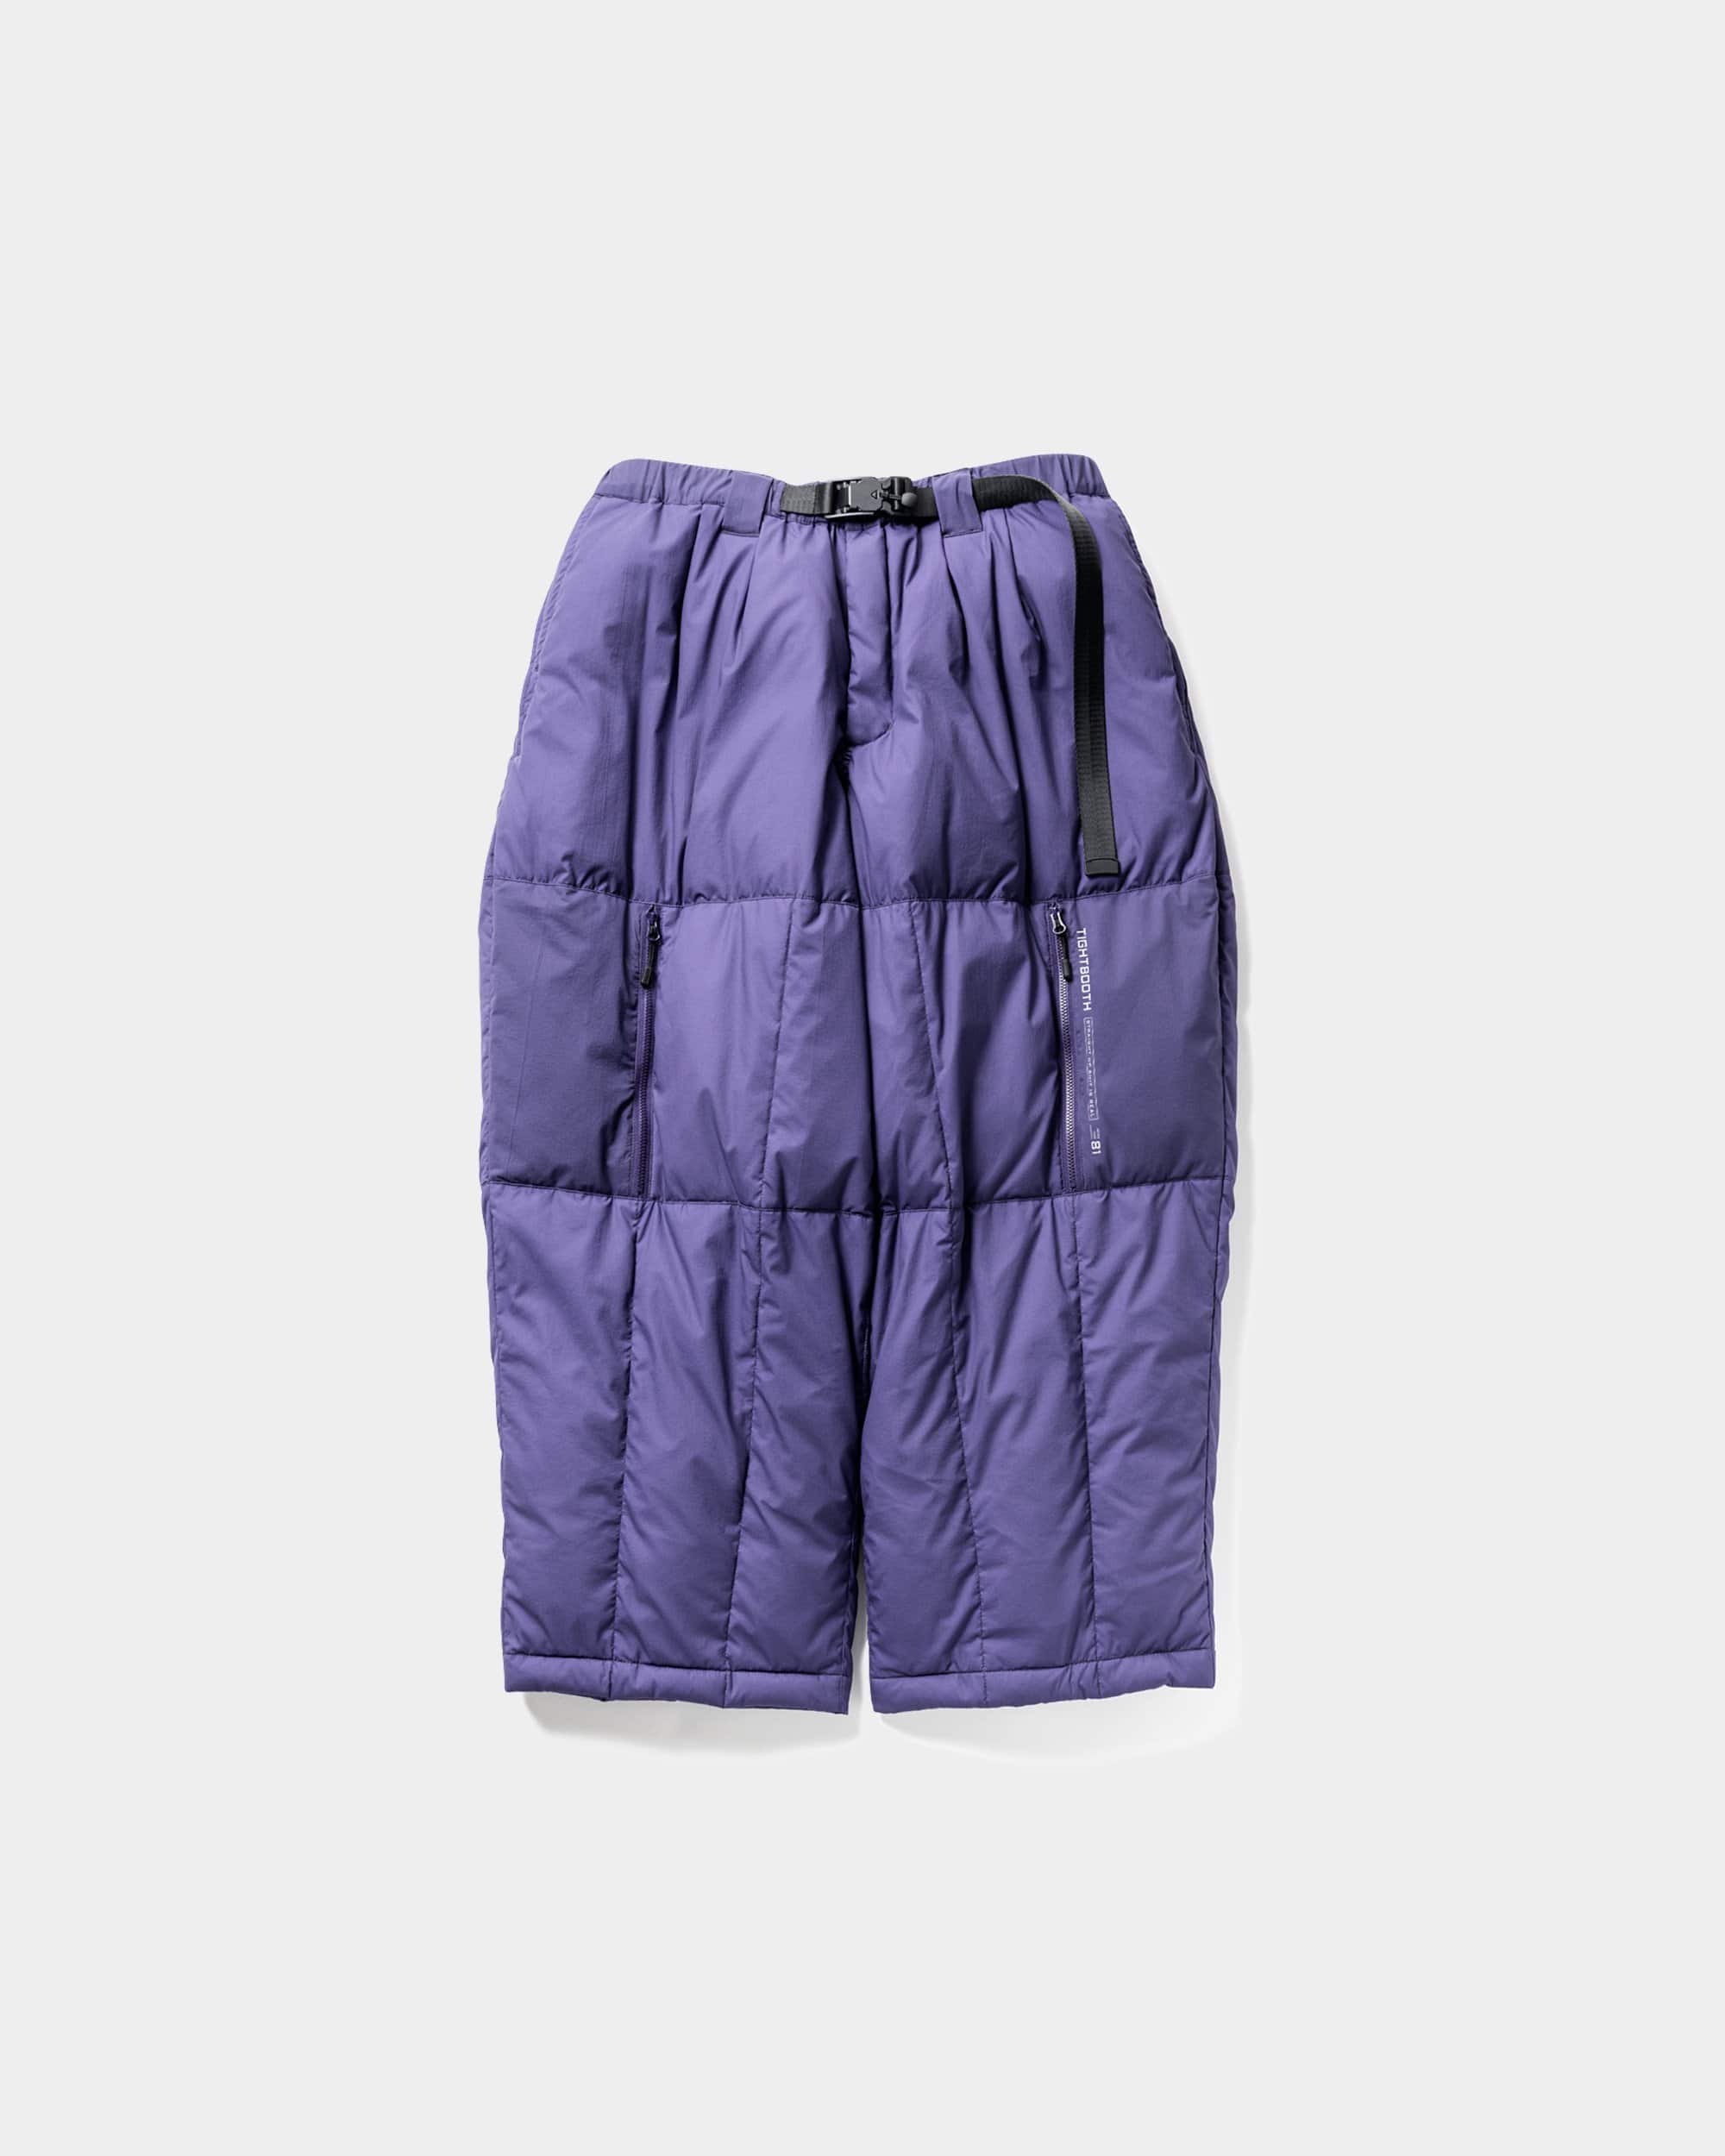 TIGHT BOOTH] SIX PACK DOWN PANTS(M PURPLE)｜ MSPCプロダクト ソート